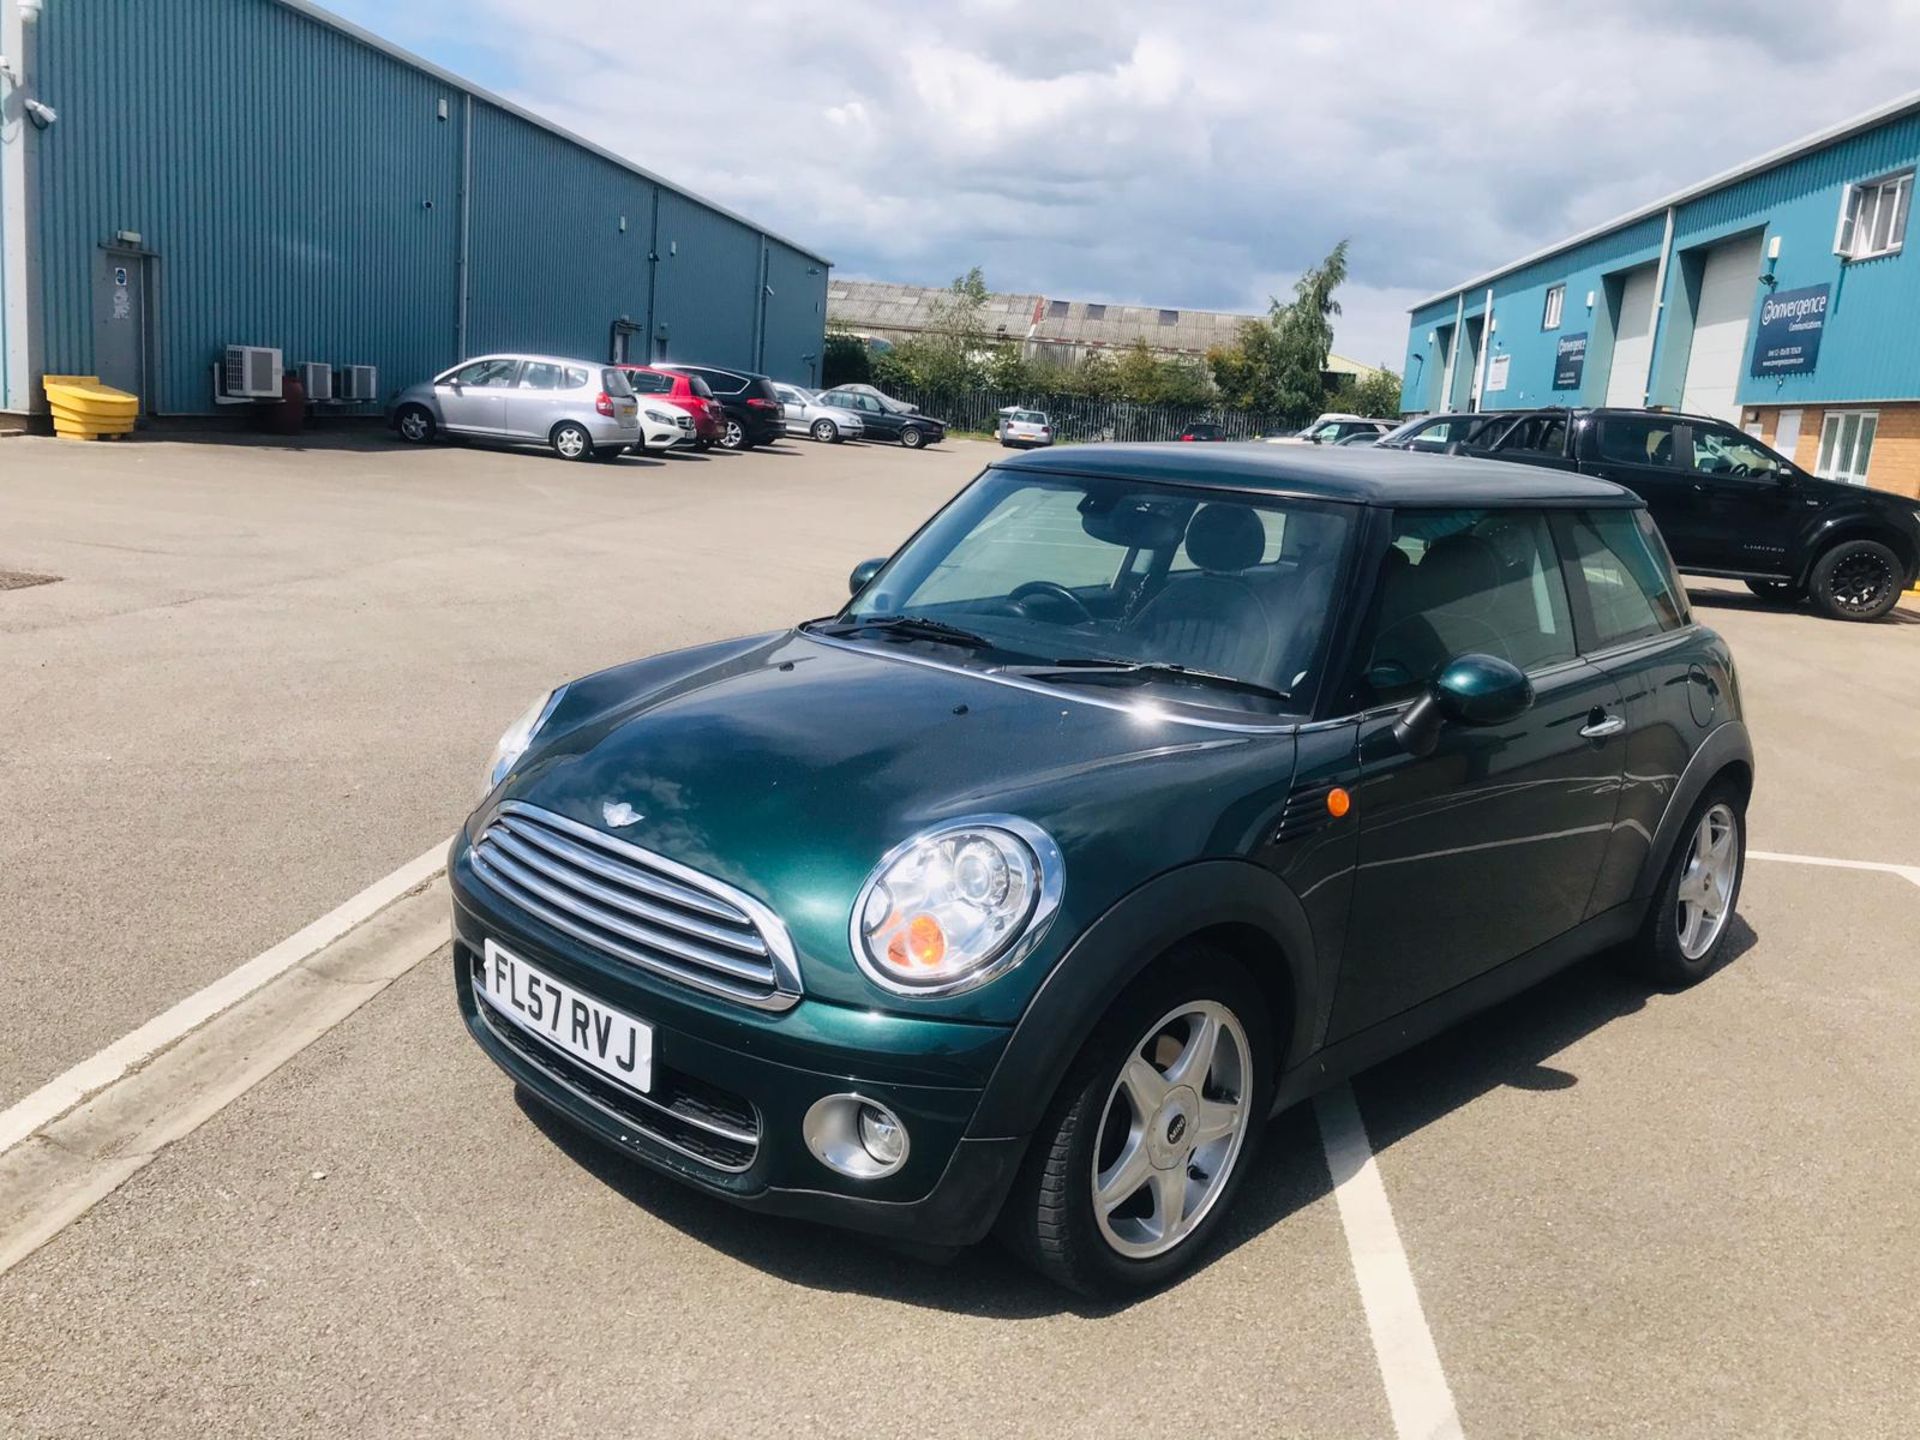 (RESERVE MET) Mini Cooper 1.6 D Hatchback - 2008 Model - Full Leather - Air Con - Heated Screen -